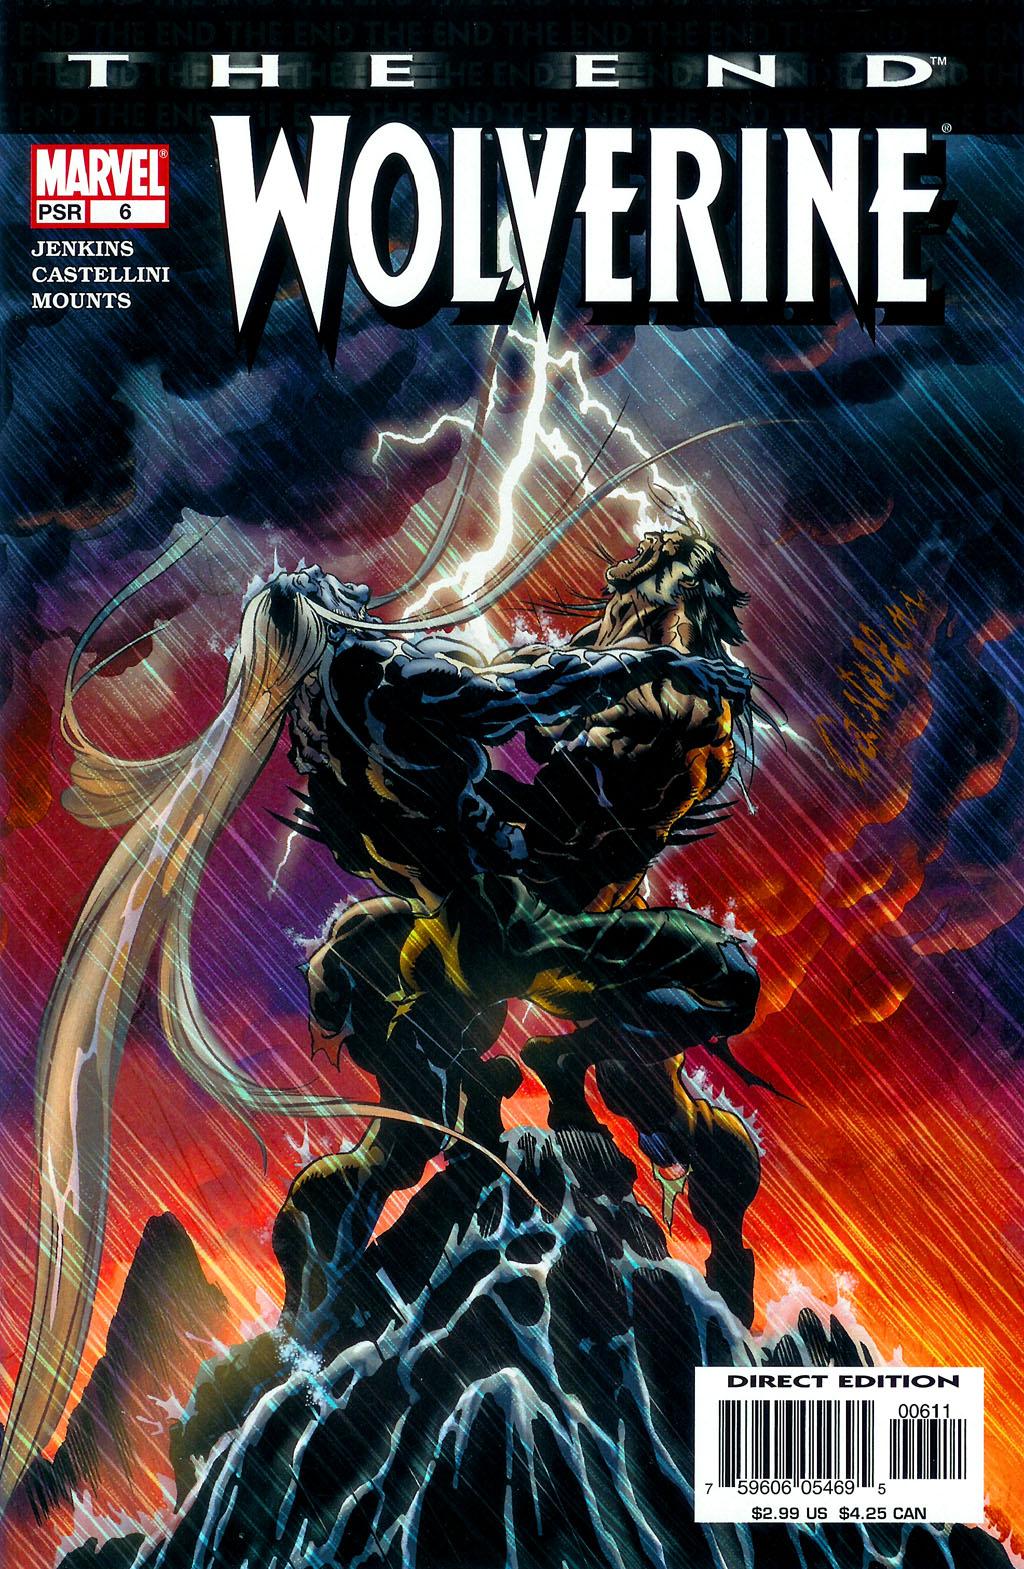 Wolverine: The End Vol. 1 #6